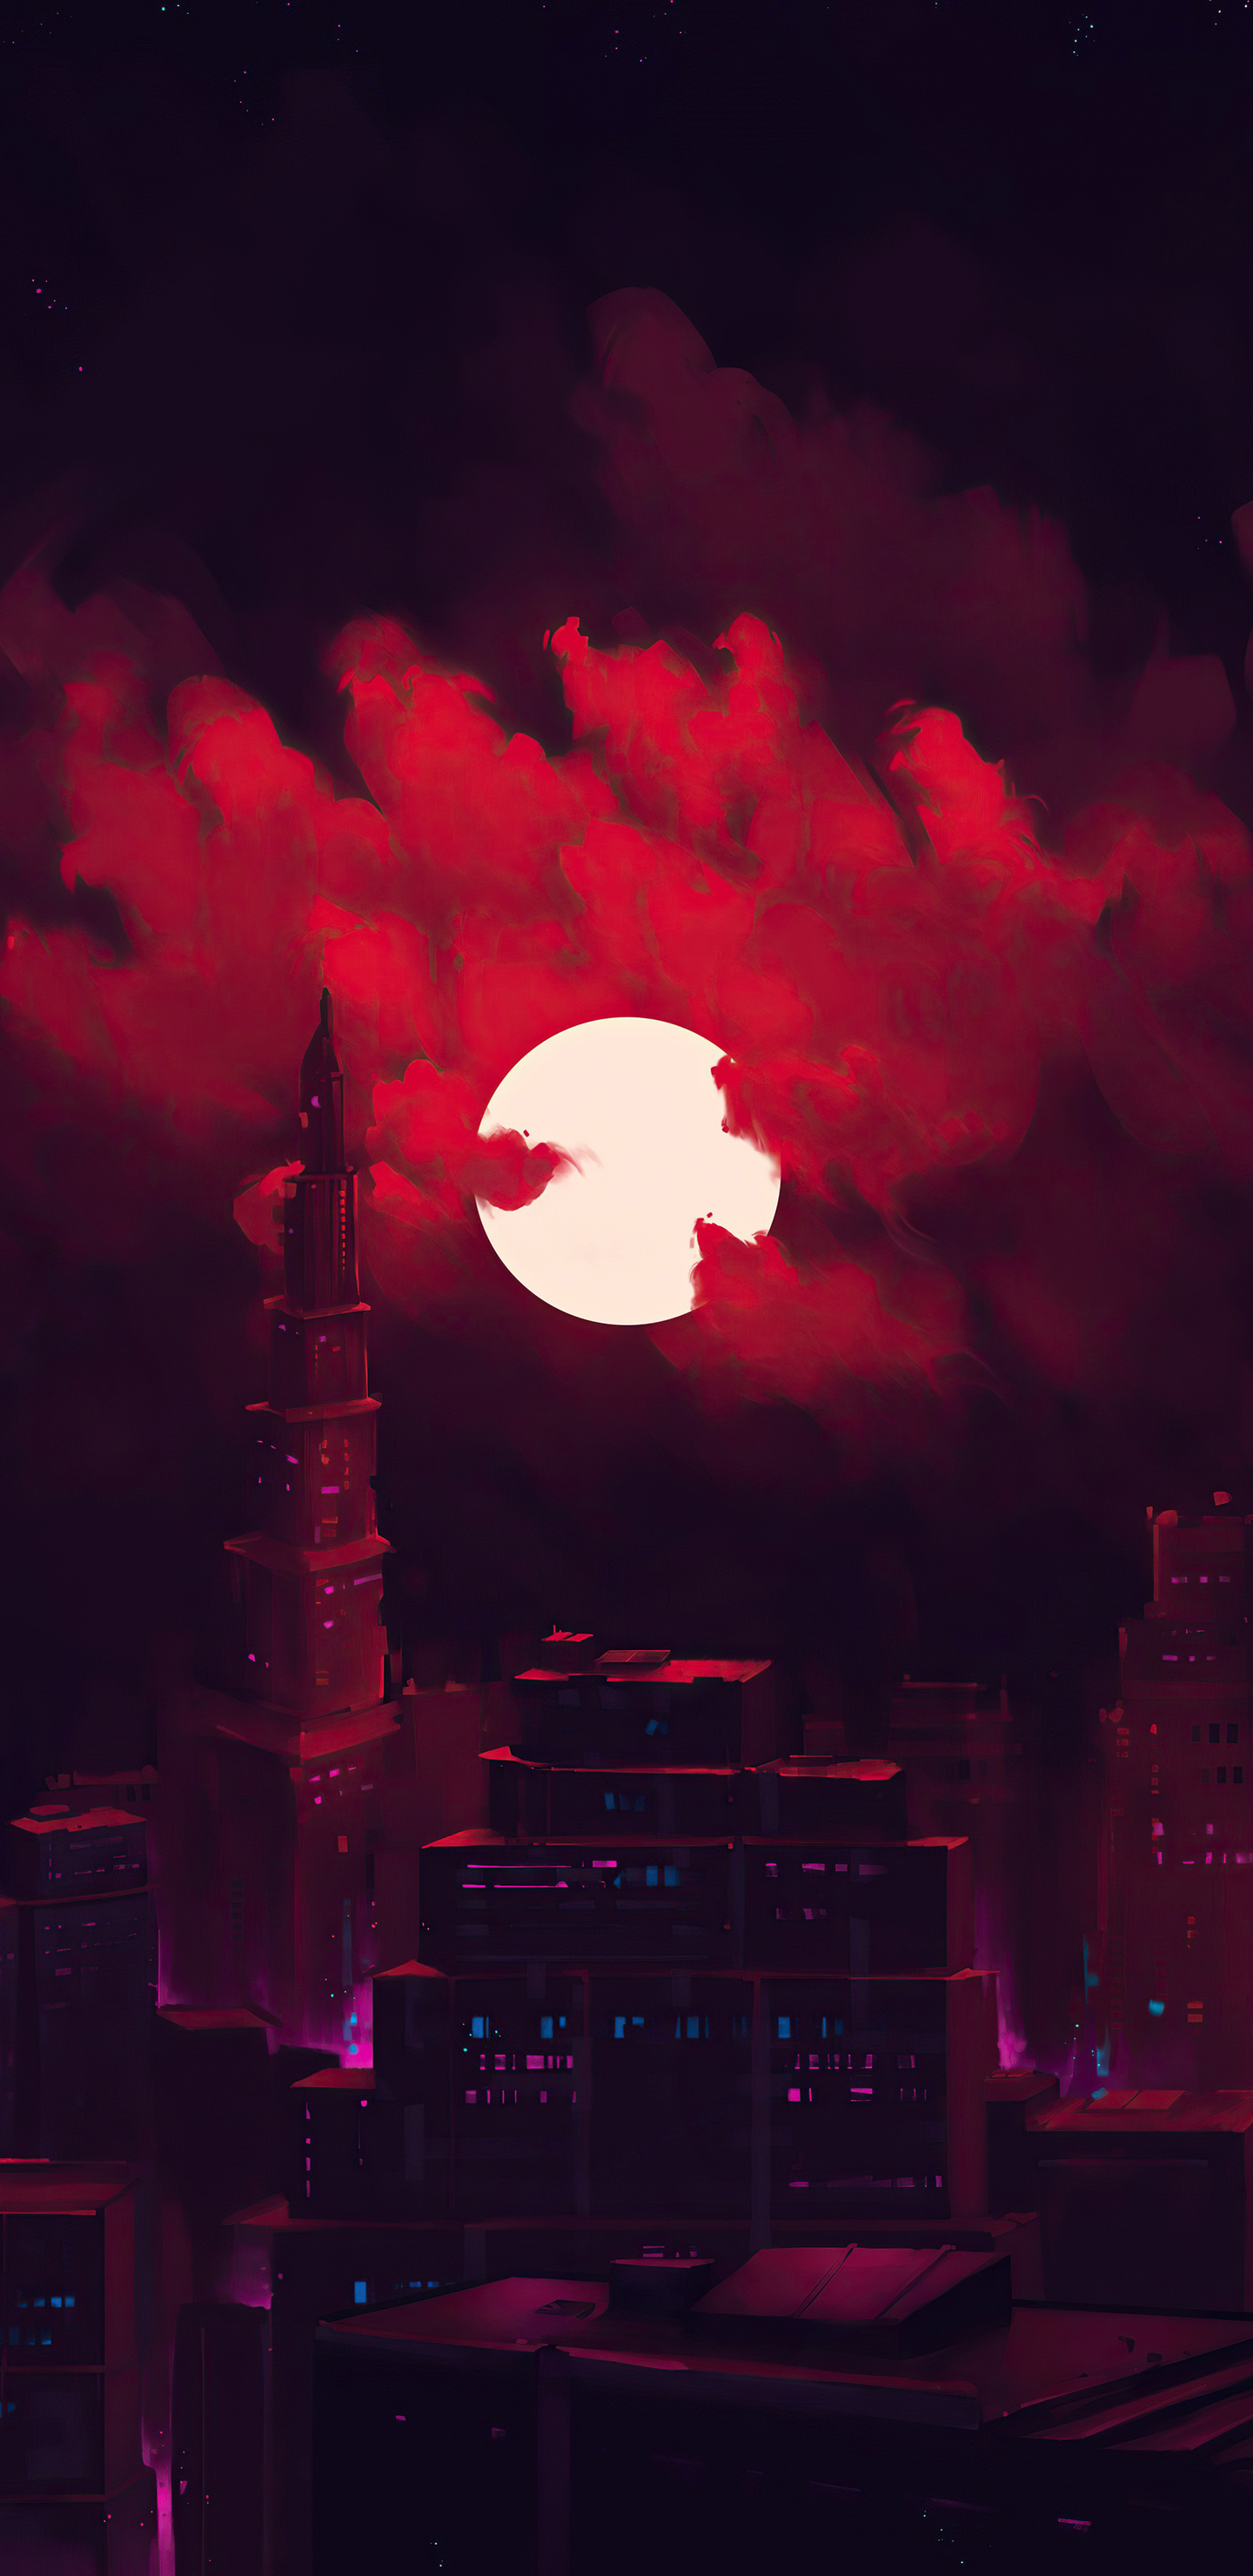 A digital painting of a futuristic cityscape with a red glowing full moon in the background - Crimson